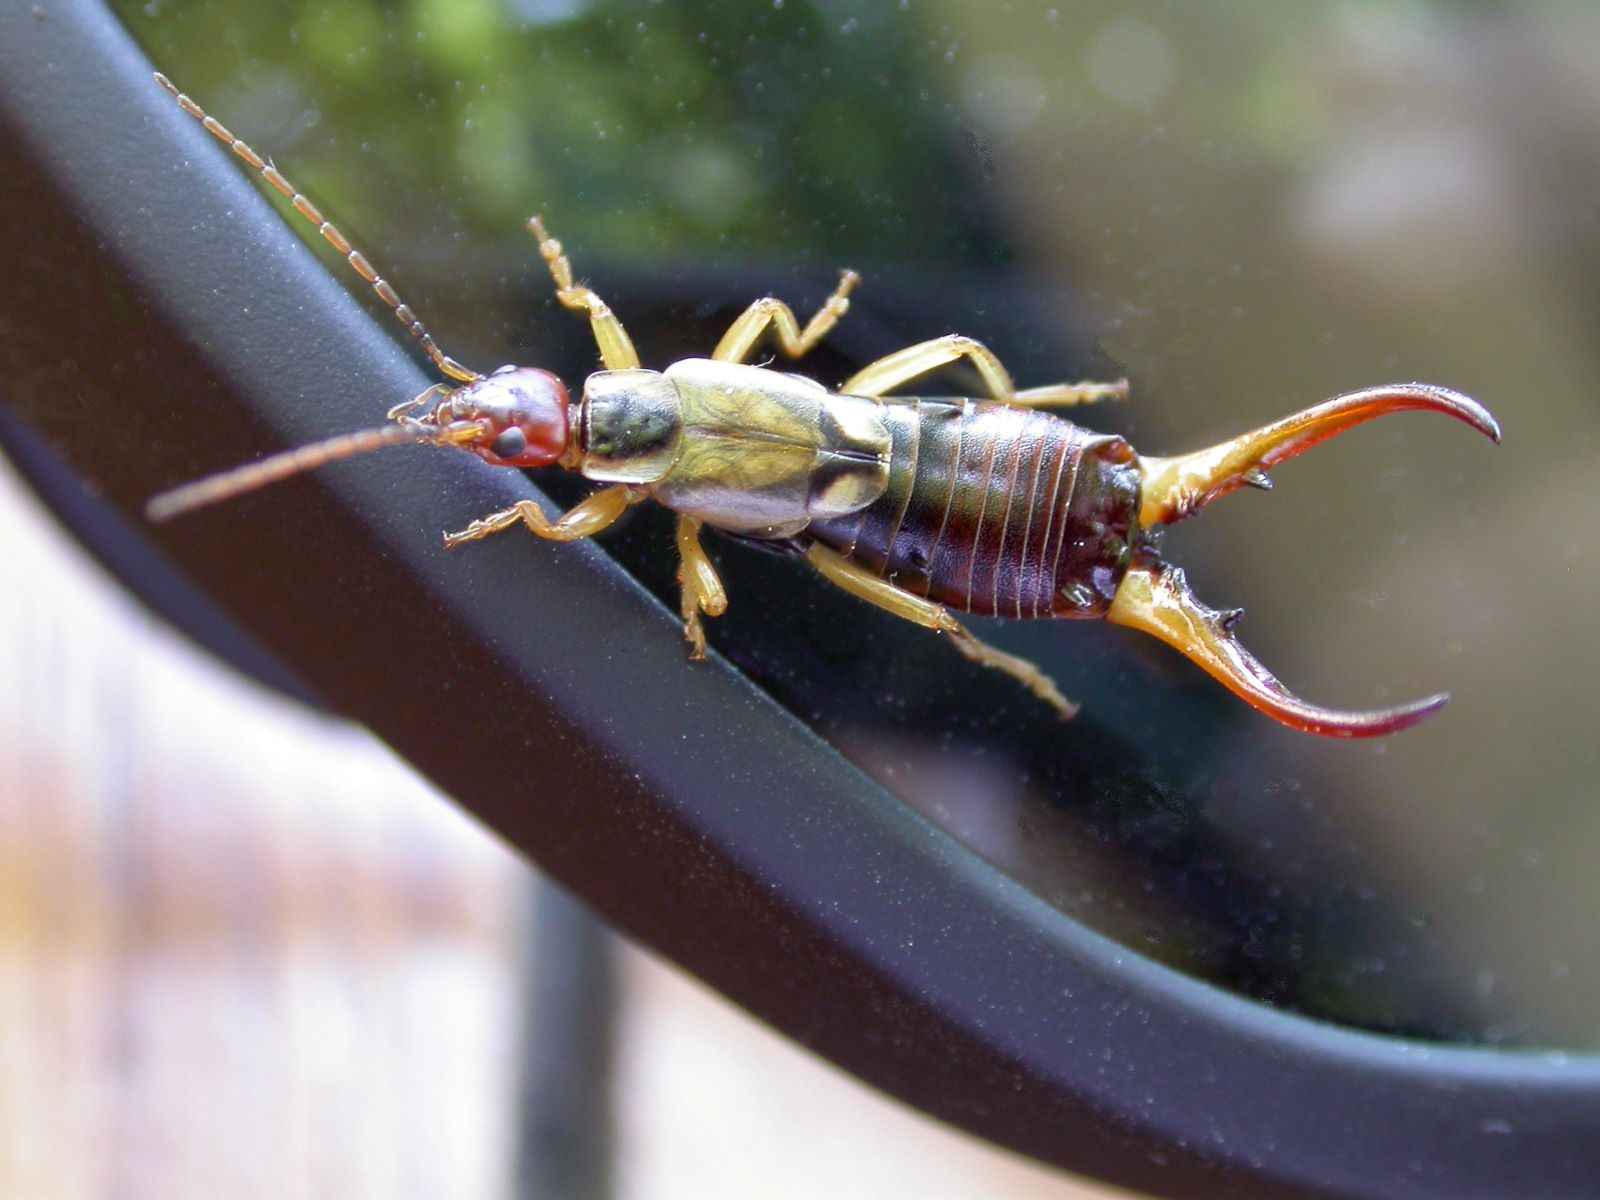 Mysterious Invasion: Unexplained Earwig Infestation In Parents’ House